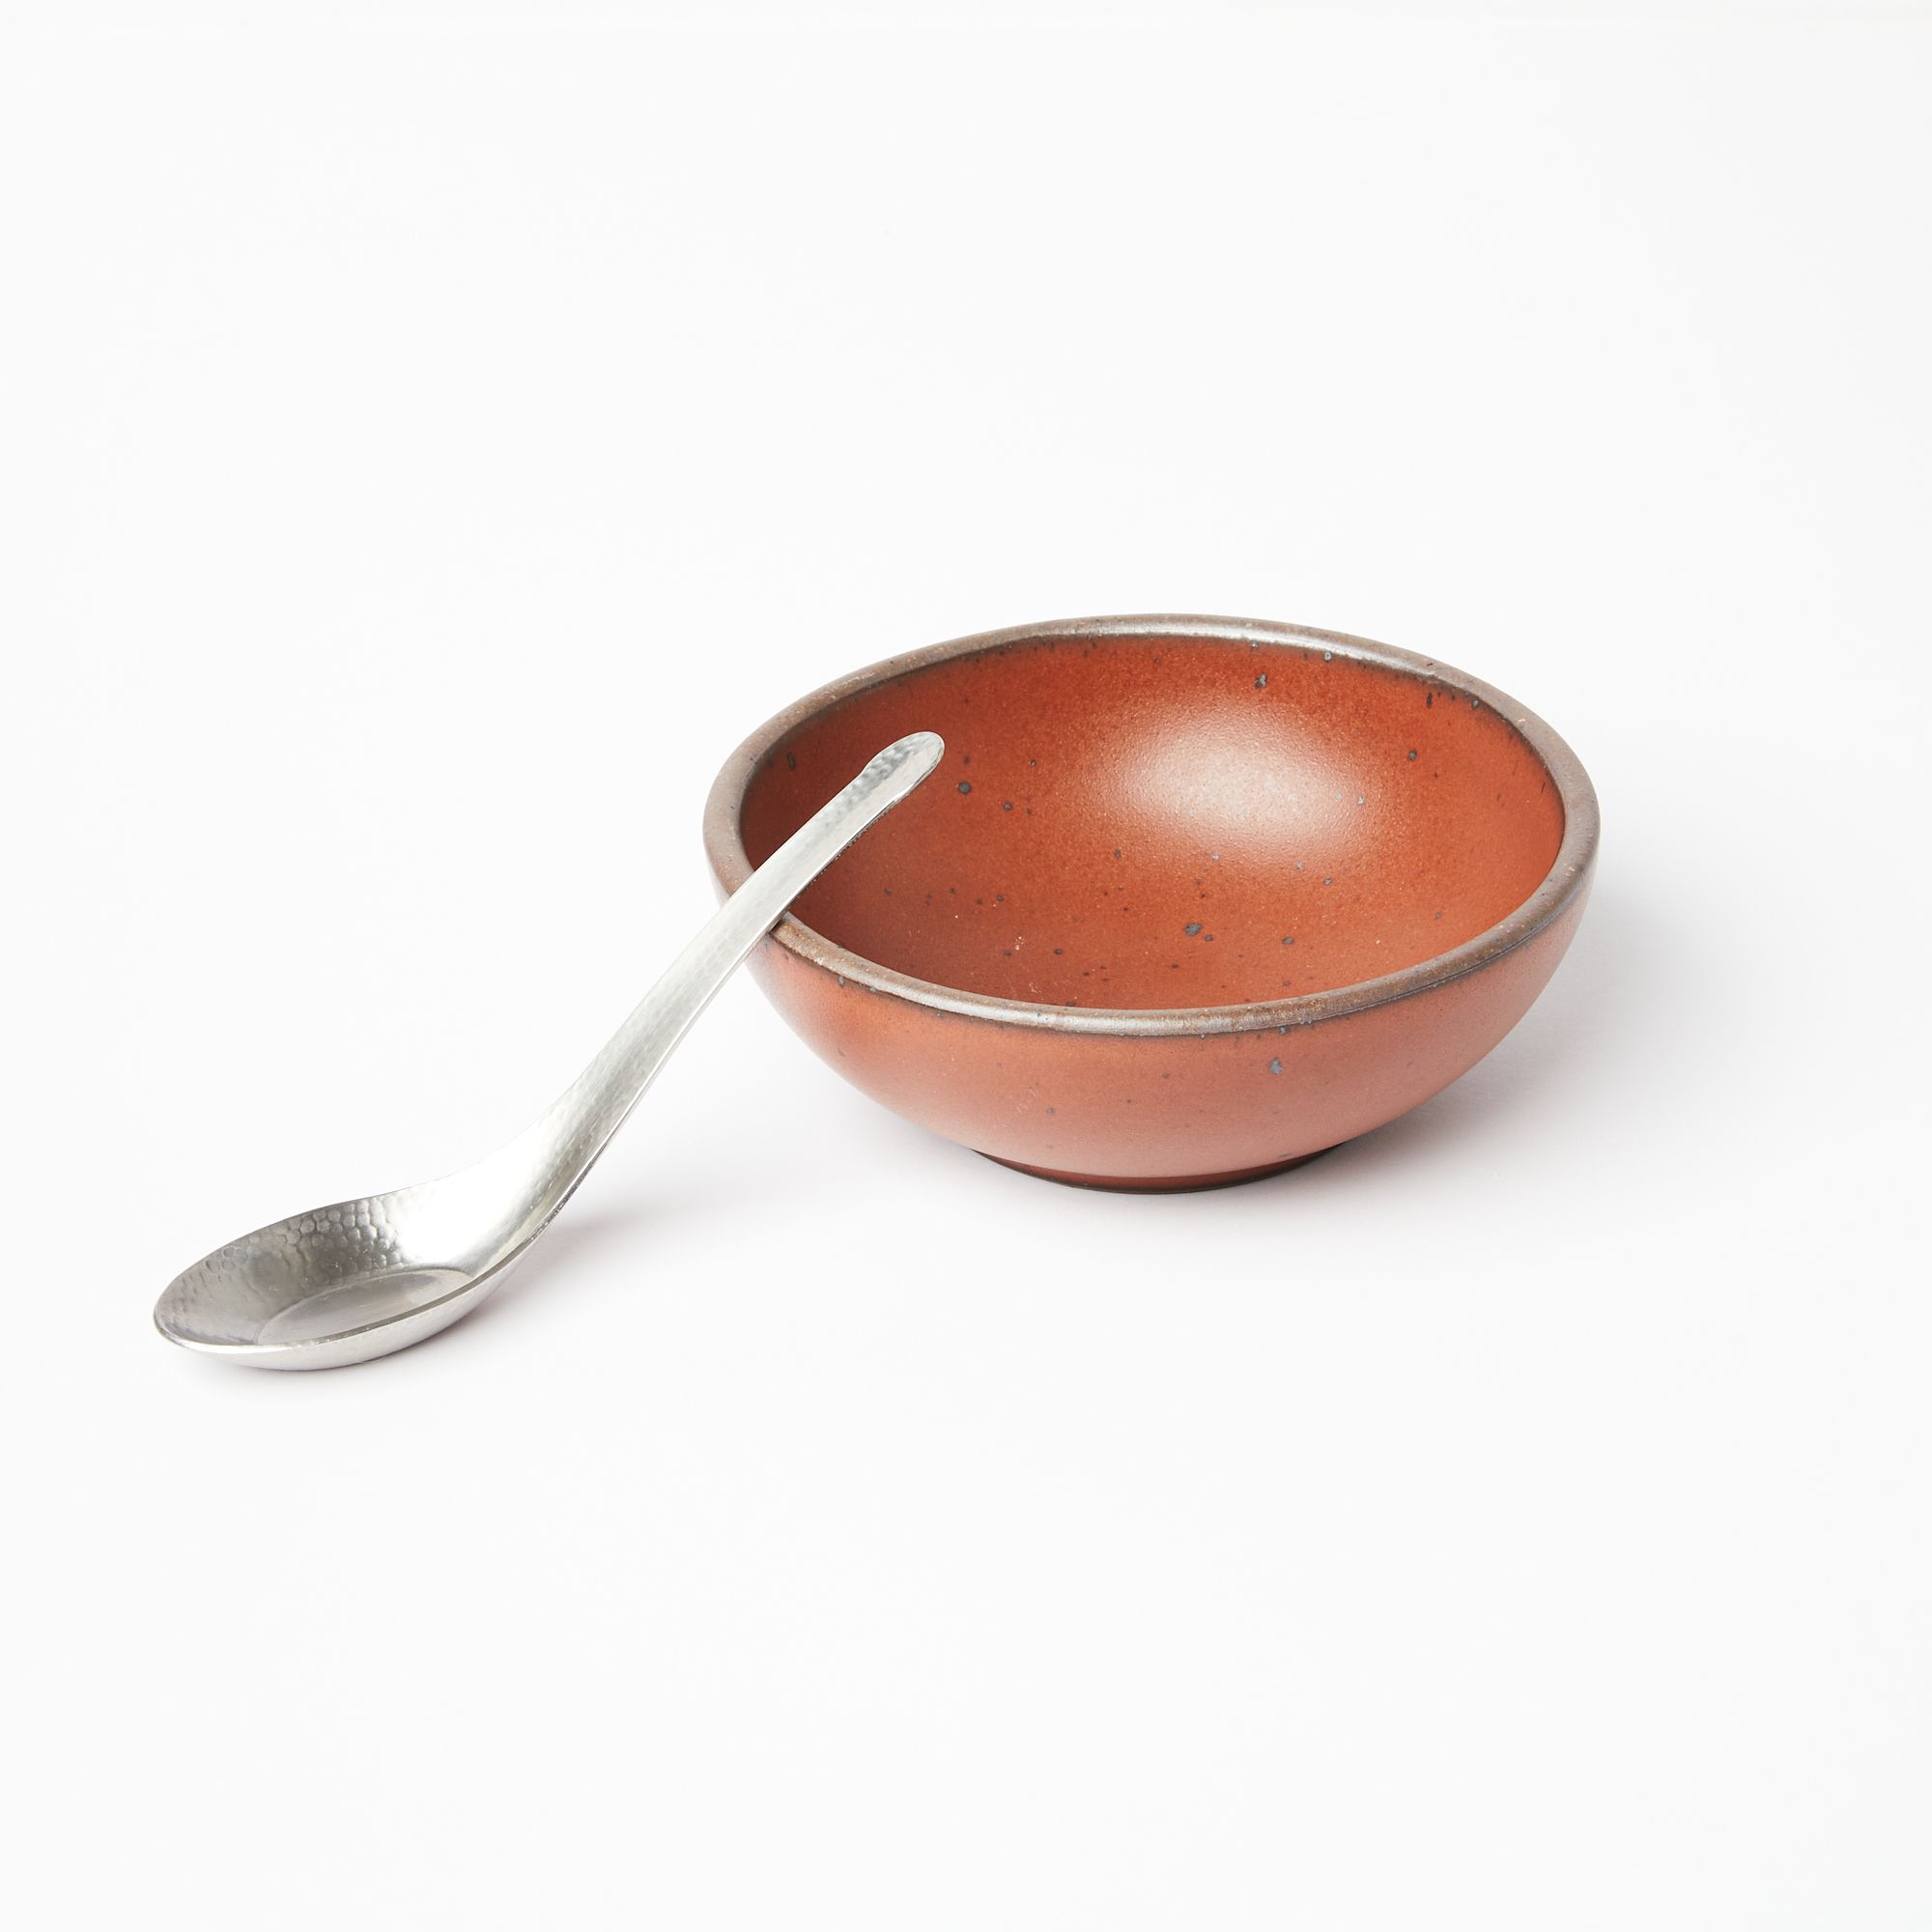 A steel Asian soup spoon with hammered finish leans on a ceramic terracotta bowl